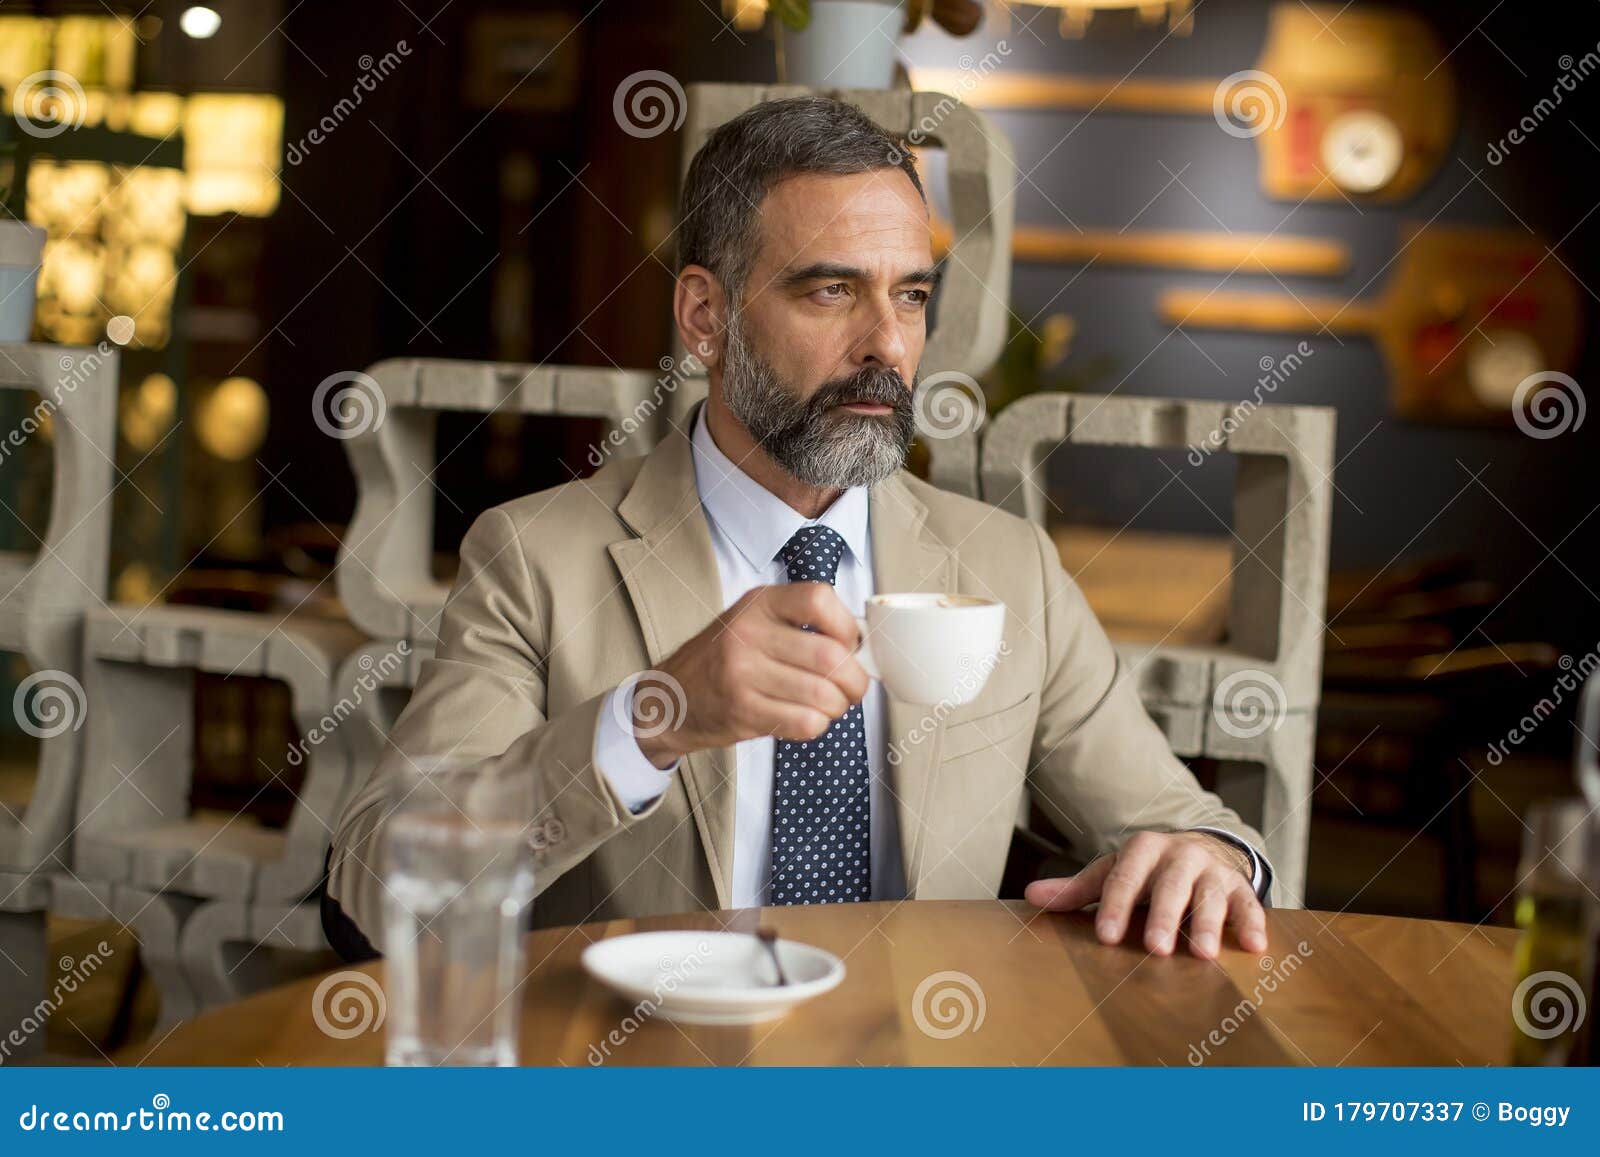 Thoughtful Handsome Mature Businessman Drinking Coffee In Cafe Stock ...
